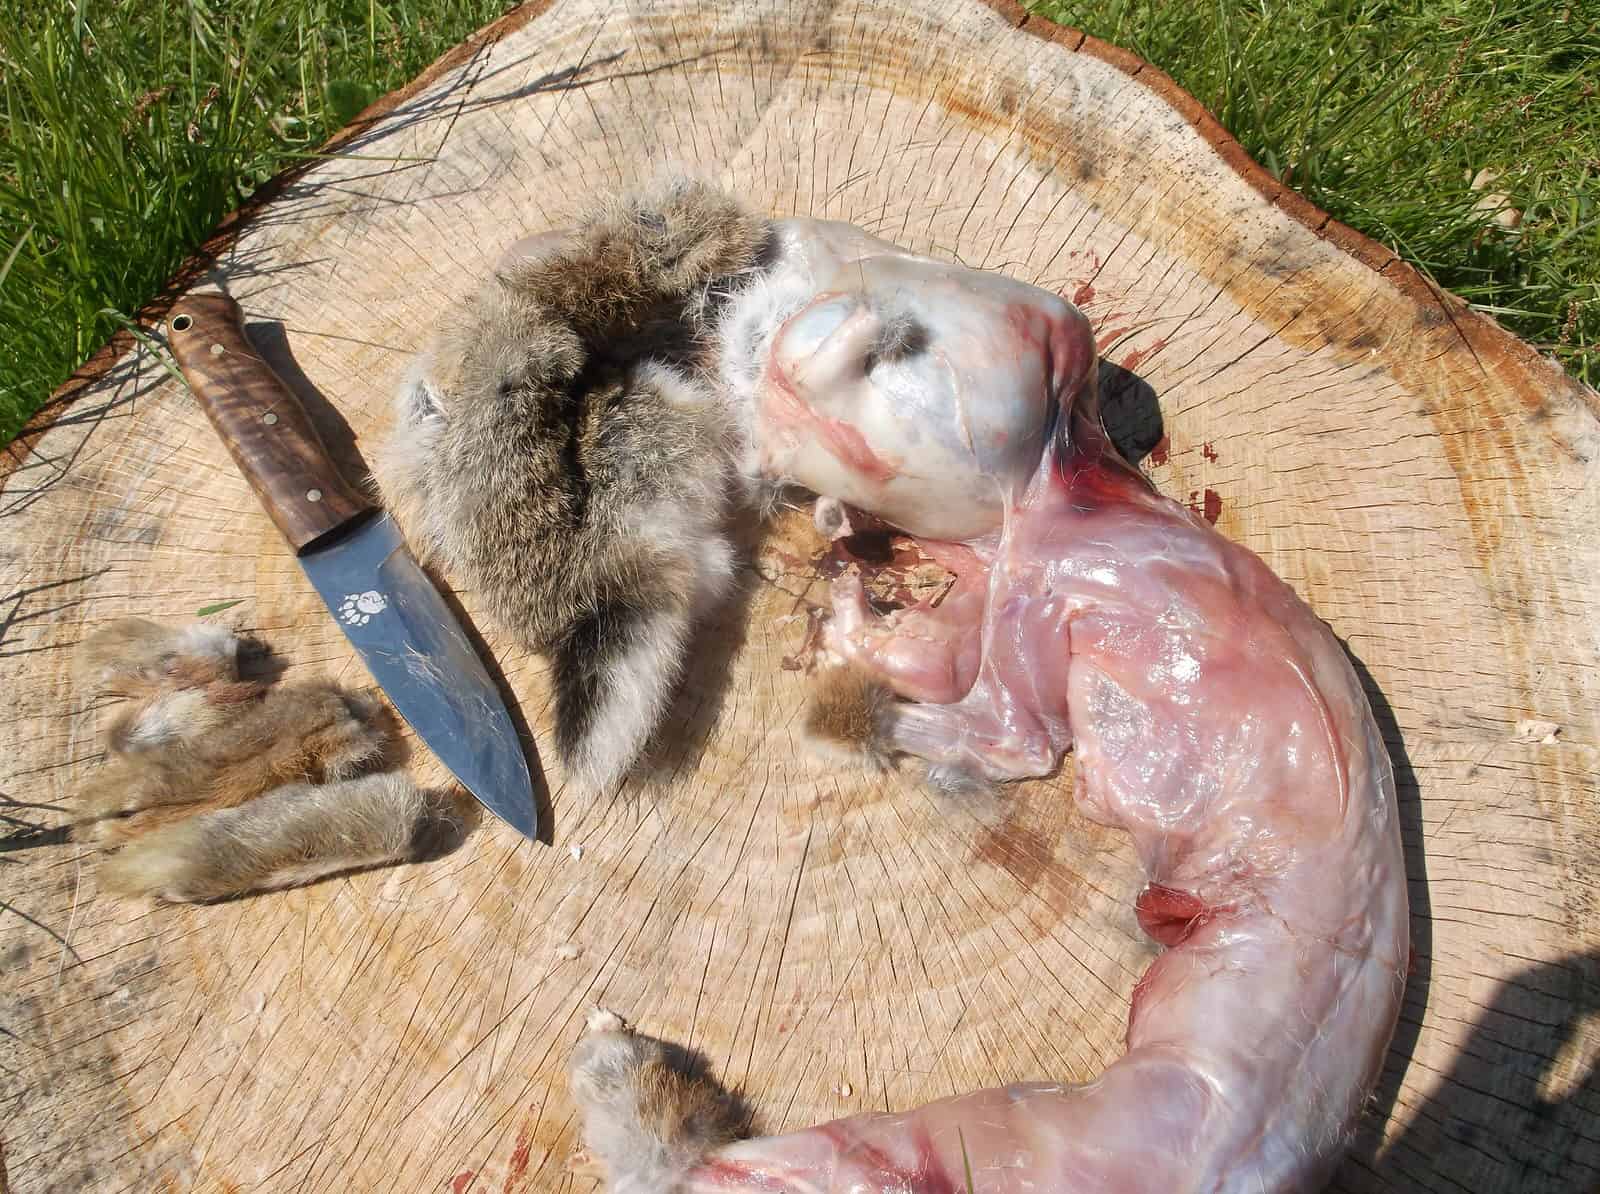 How To Skin And Butcher A Rabbit Dorset Bushcraft Courses for The Incredible as well as Beautiful how to skin a rabbit pertaining to Really encourage